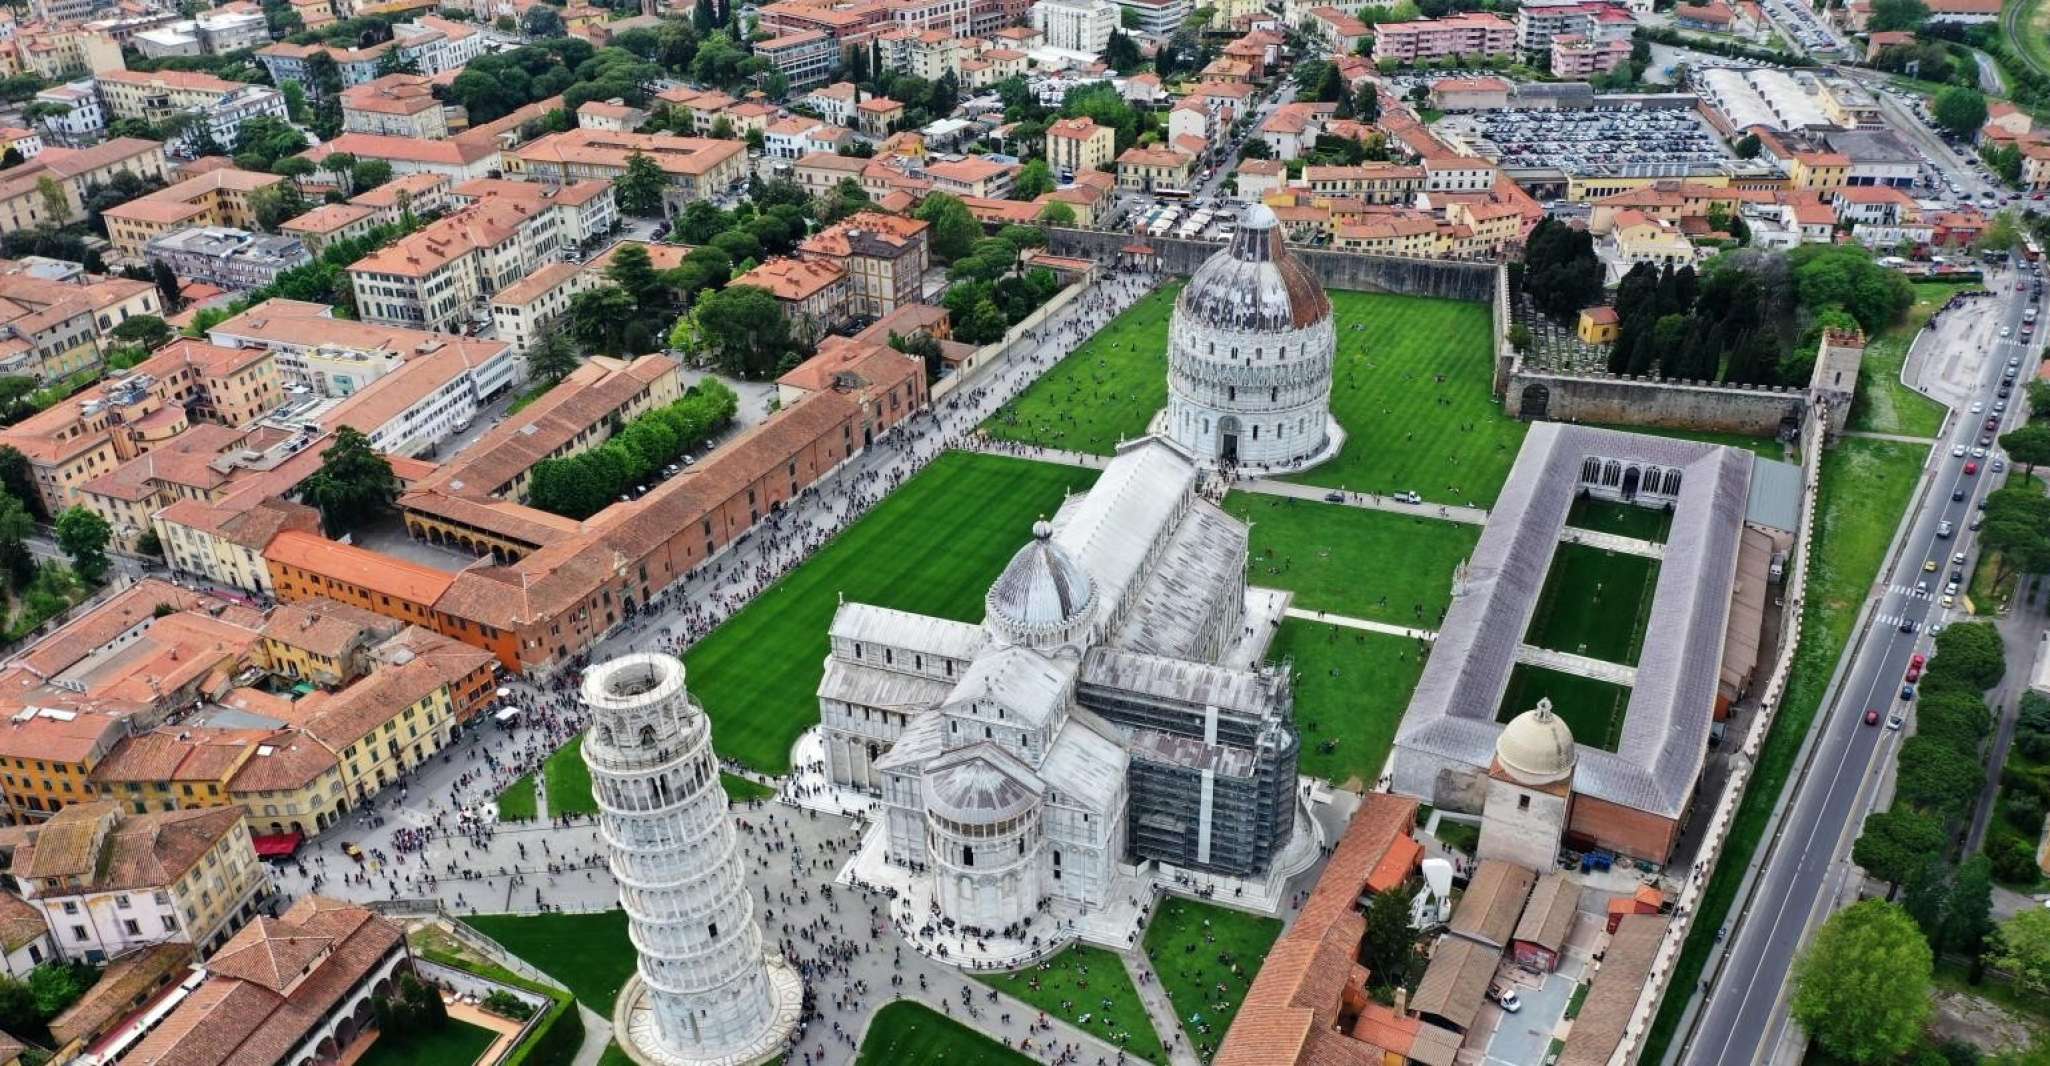 Pisa, 5 Attractions Ticket with Skip-the-Line & Audio Guide - Housity